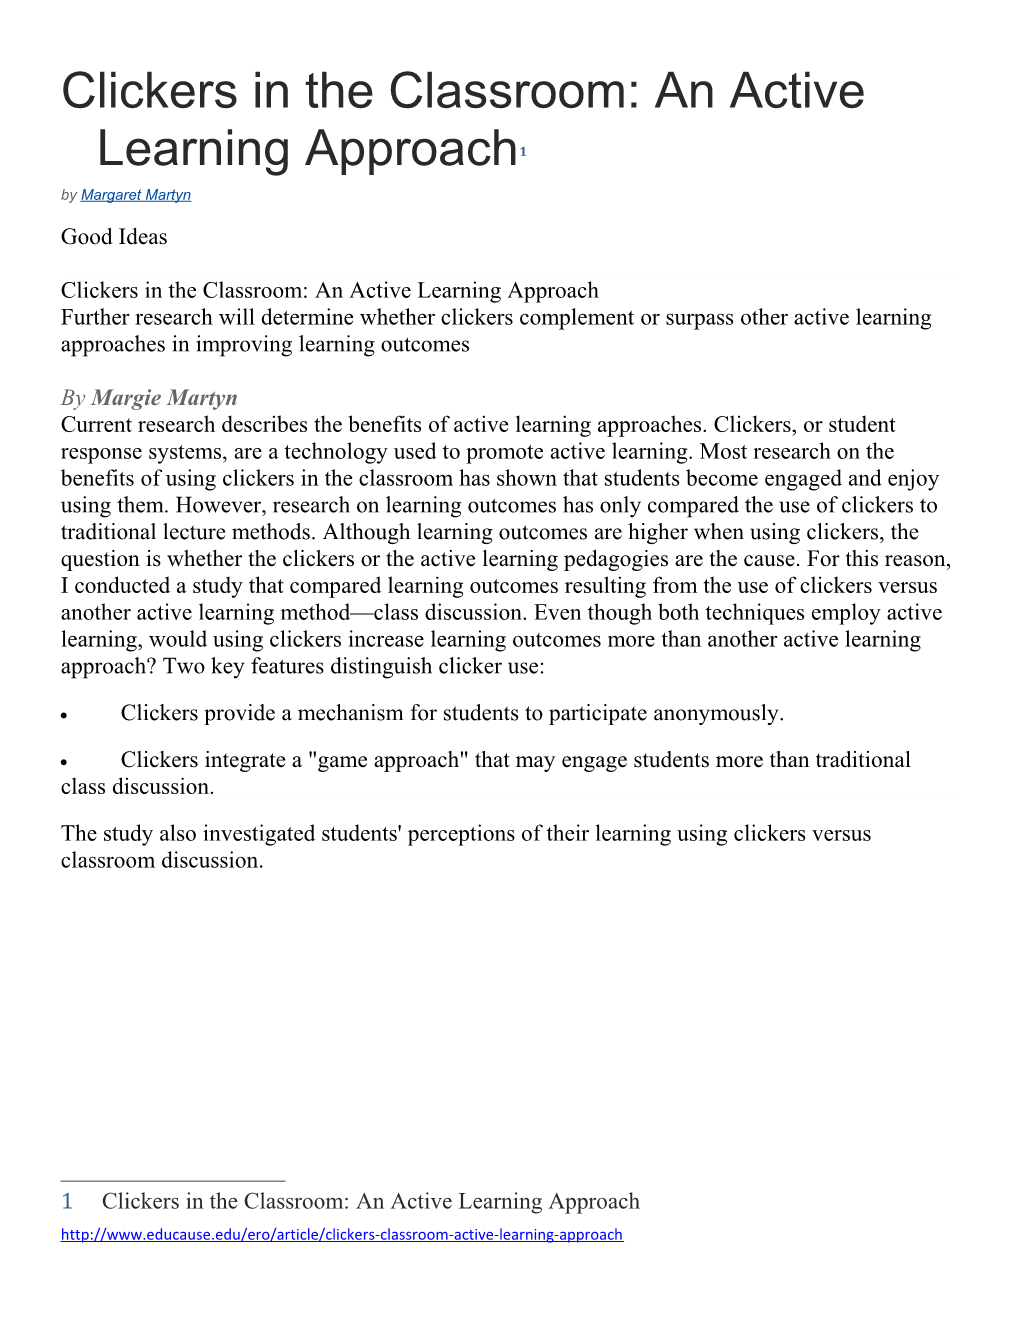 Clickers in the Classroom: an Active Learning Approach 1